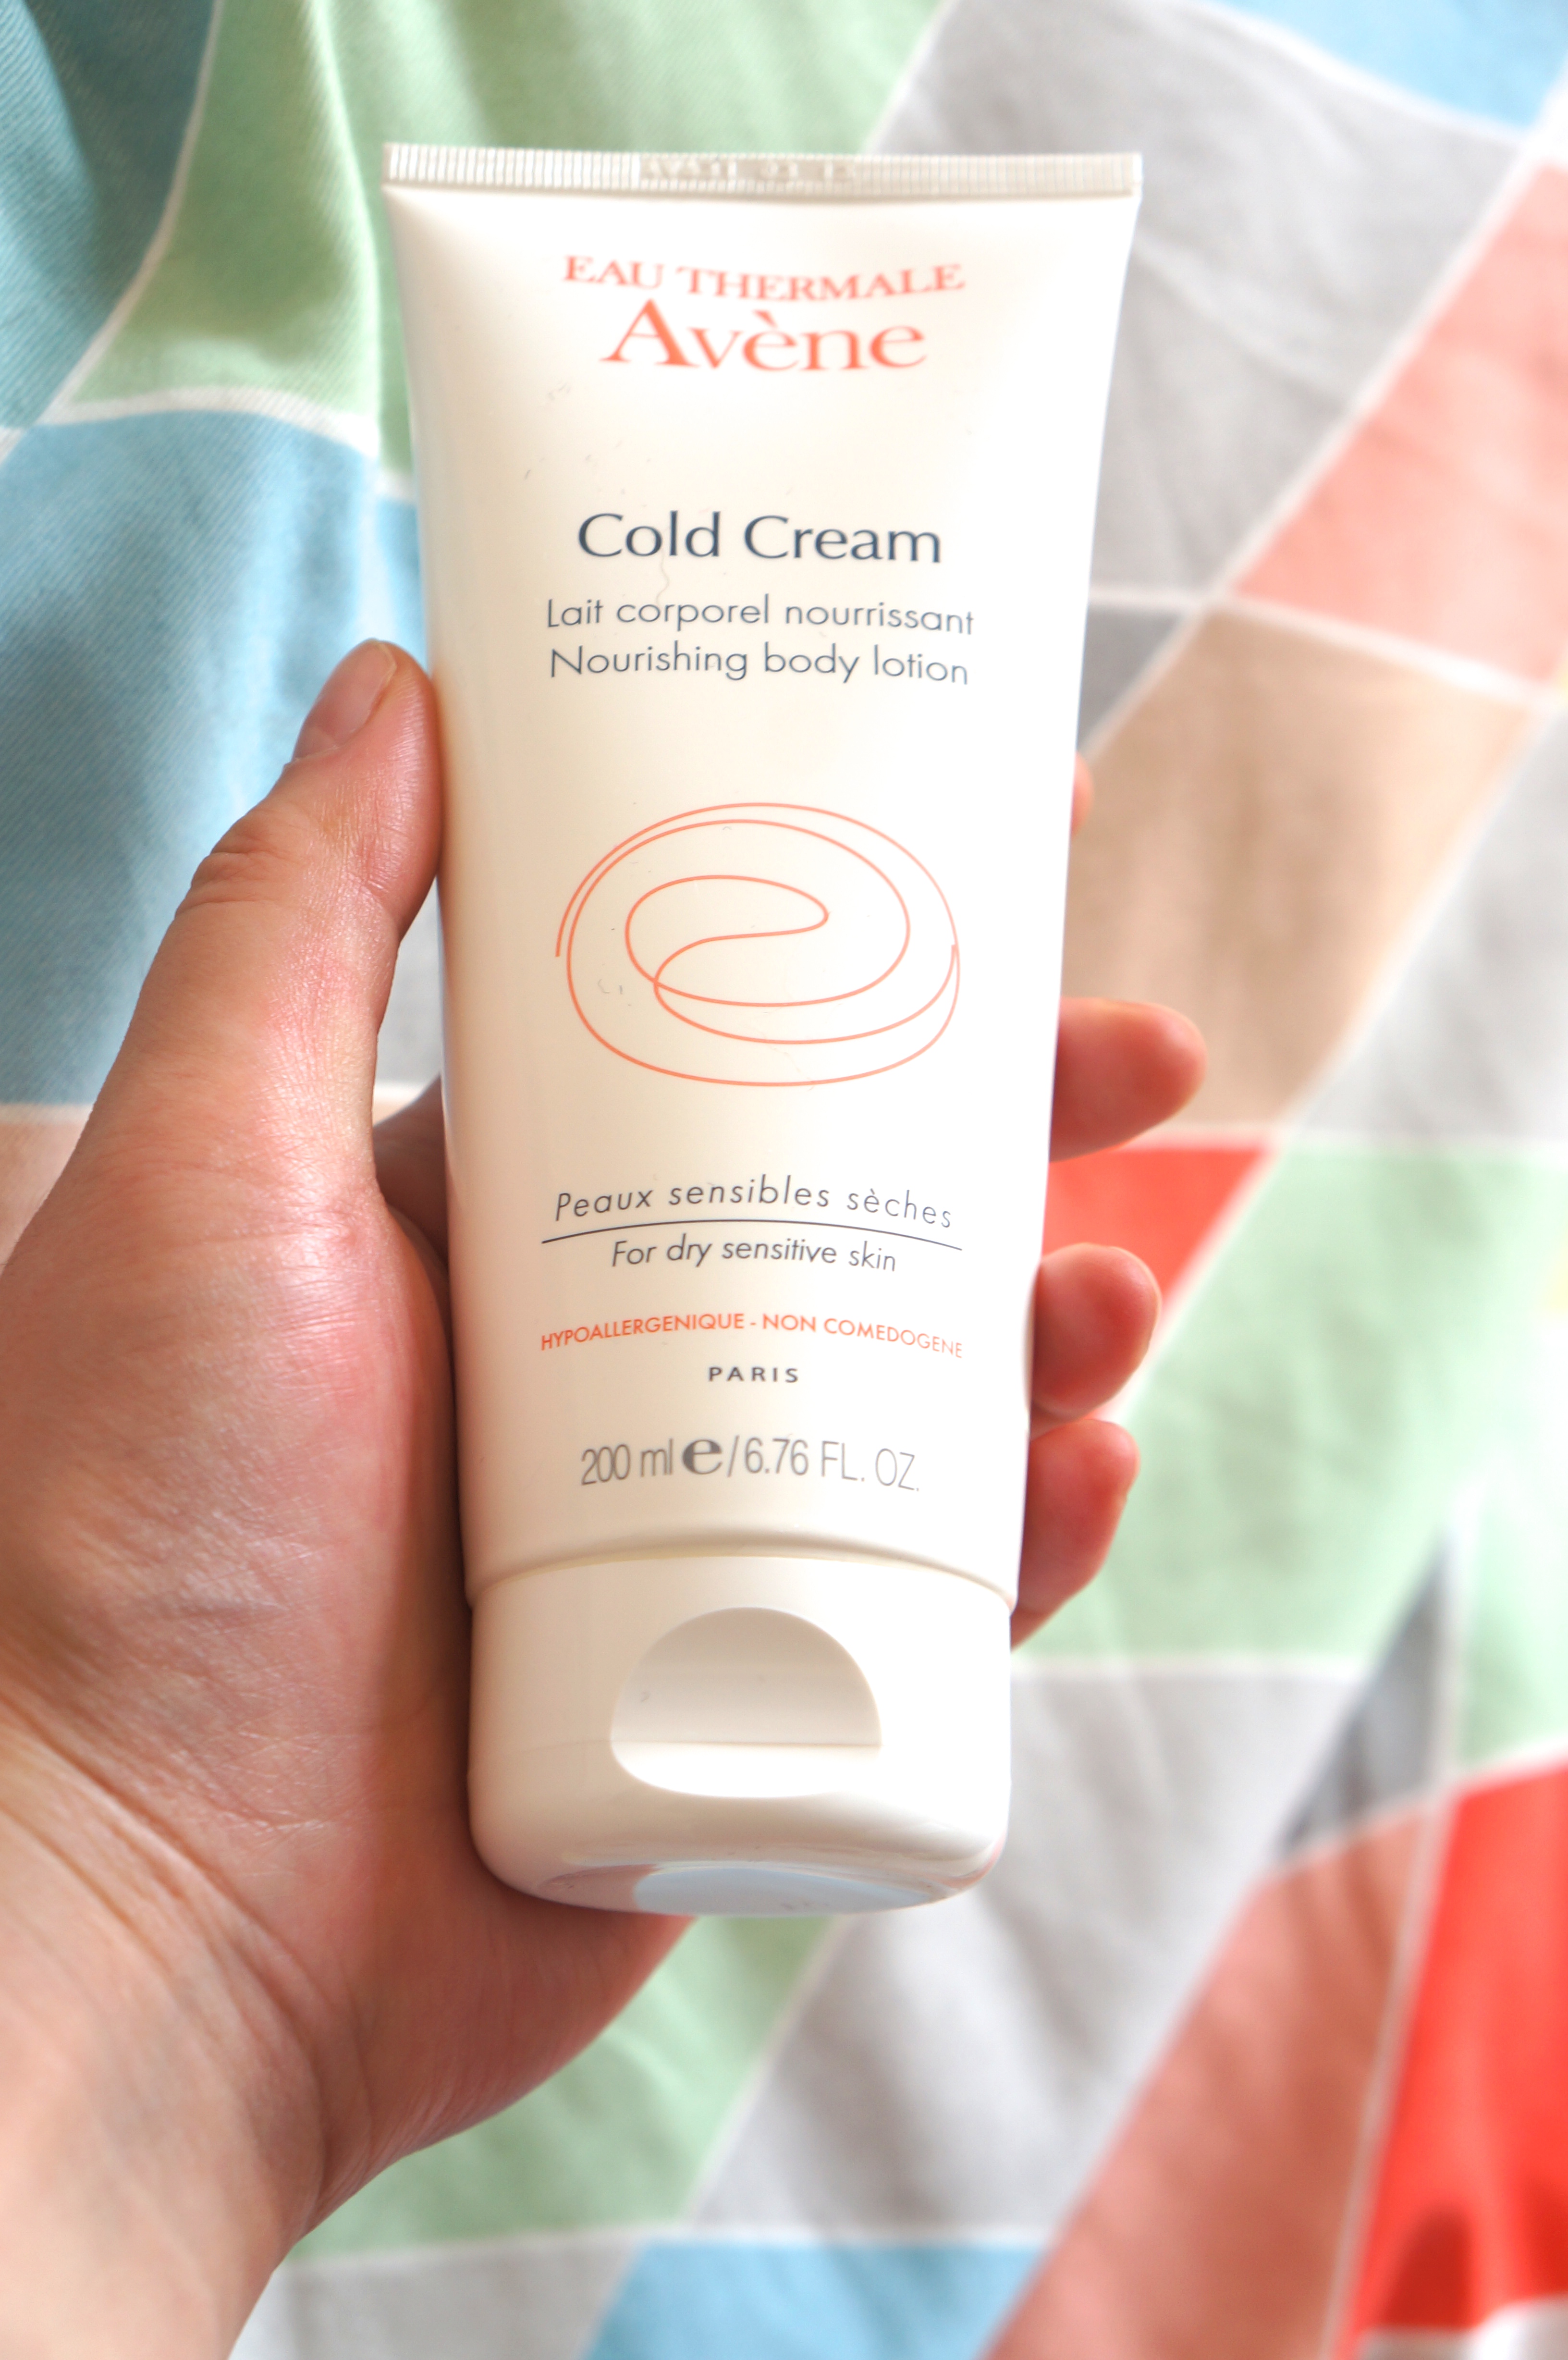 Avène Lait hydratant Cold Cream/ Pic by kiwikoo